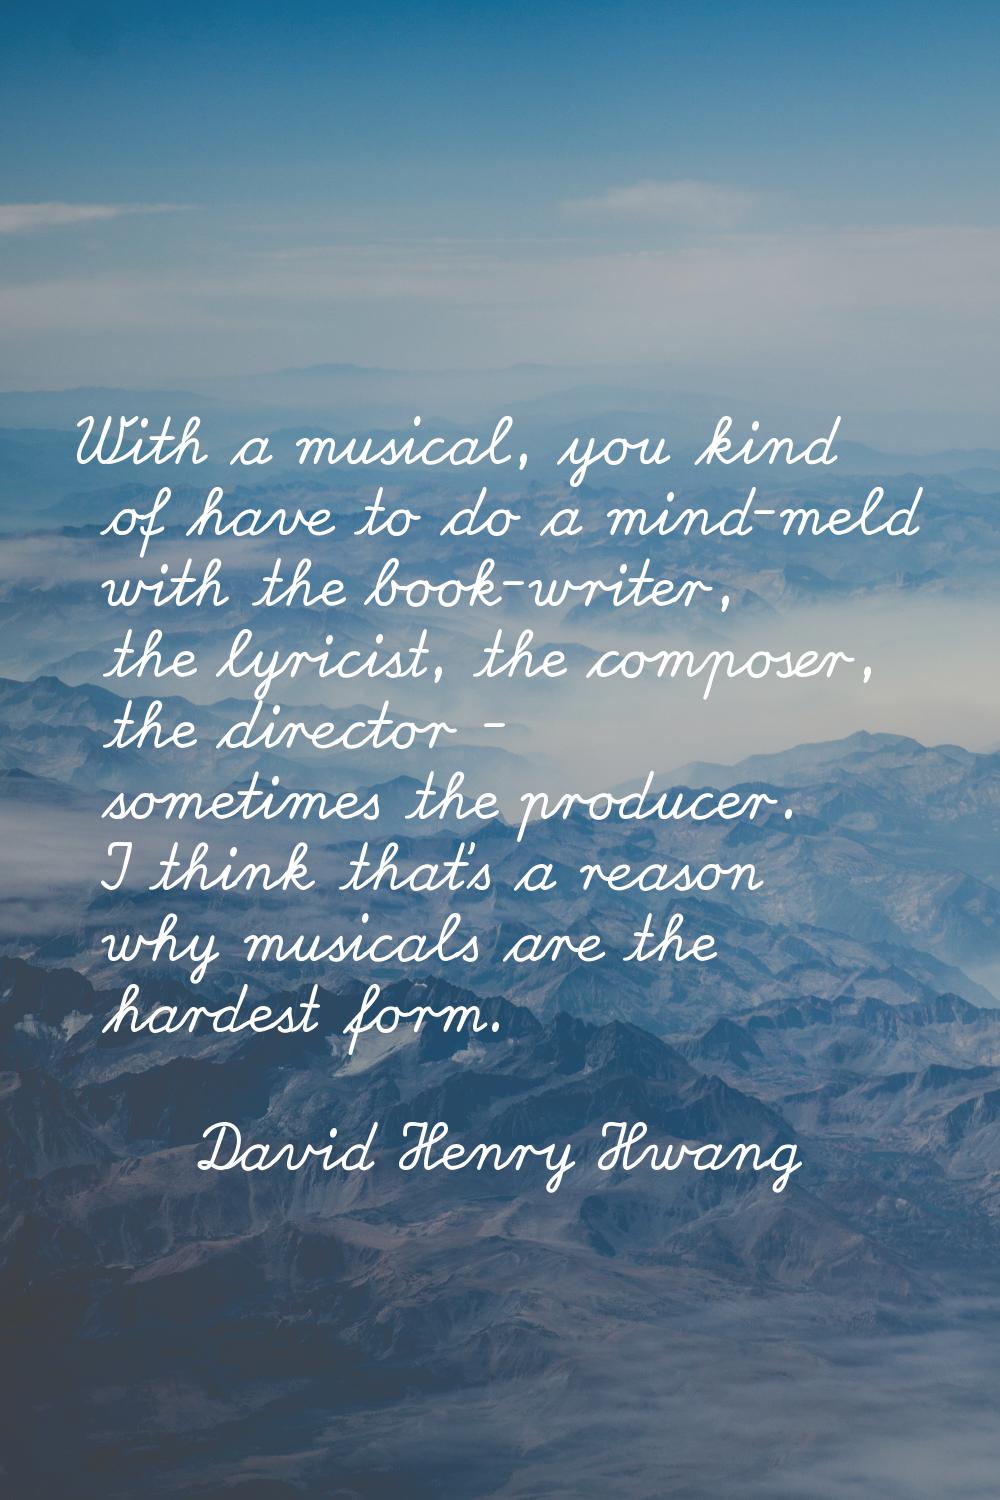 With a musical, you kind of have to do a mind-meld with the book-writer, the lyricist, the composer